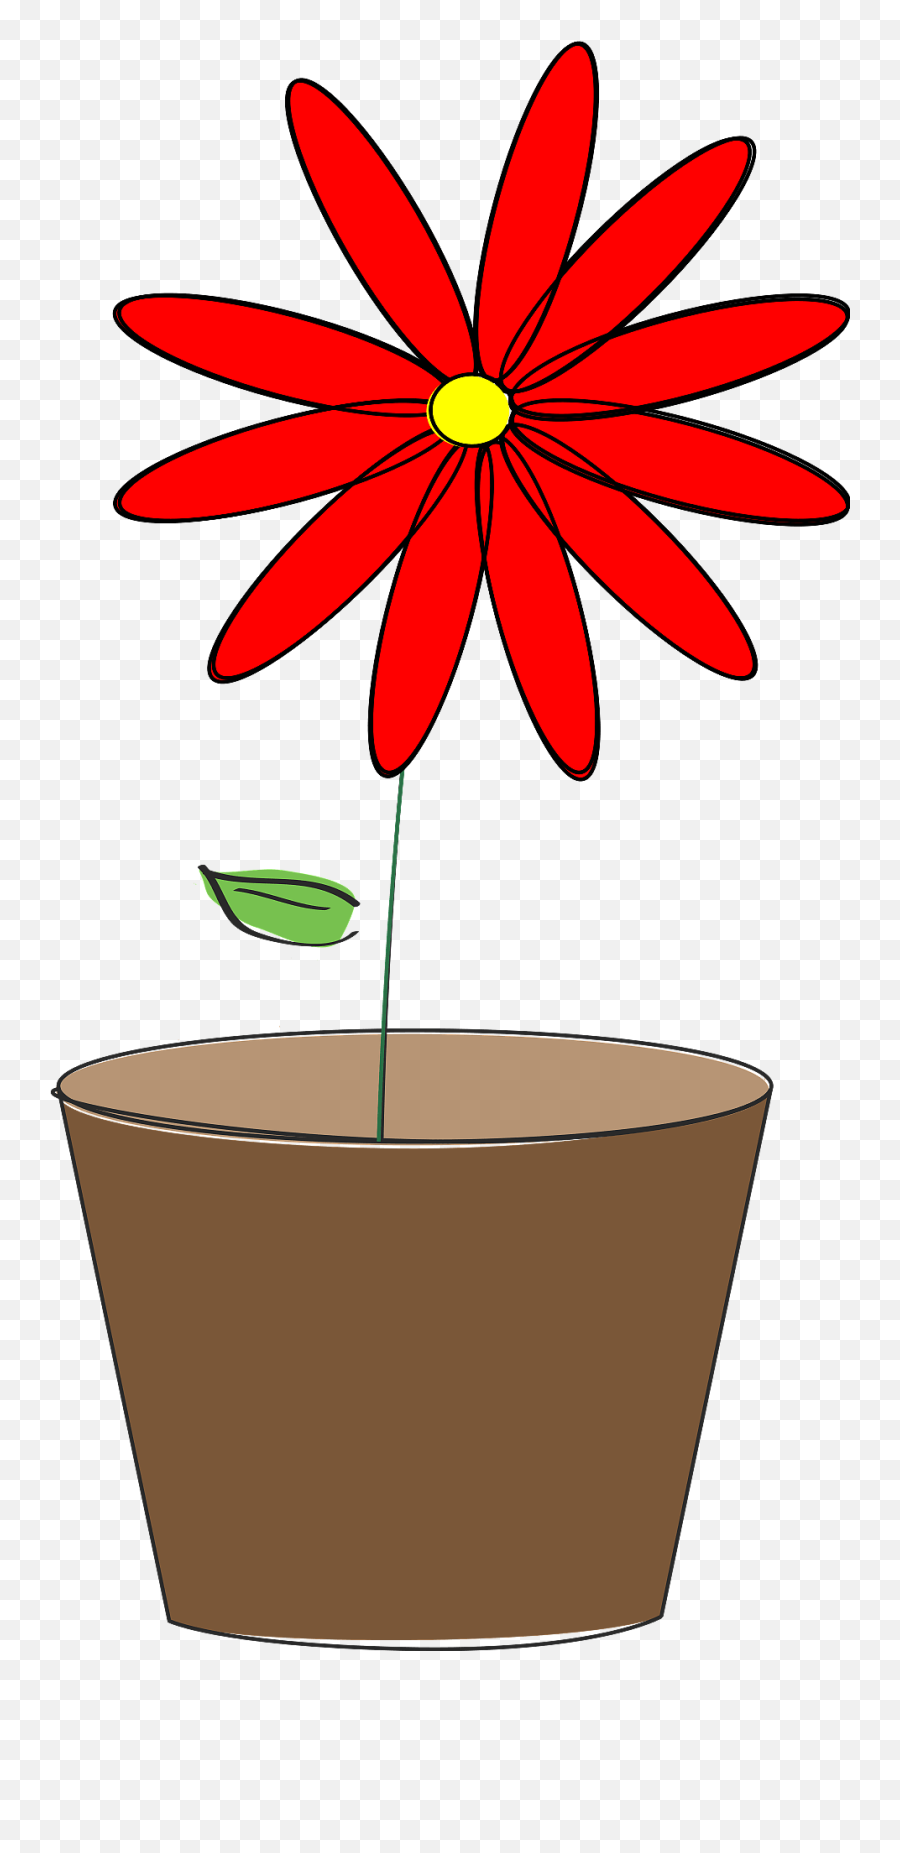 Red Flower In A Pot Clipart Free Download Transparent Png Emoji,Red Flowers Clipart